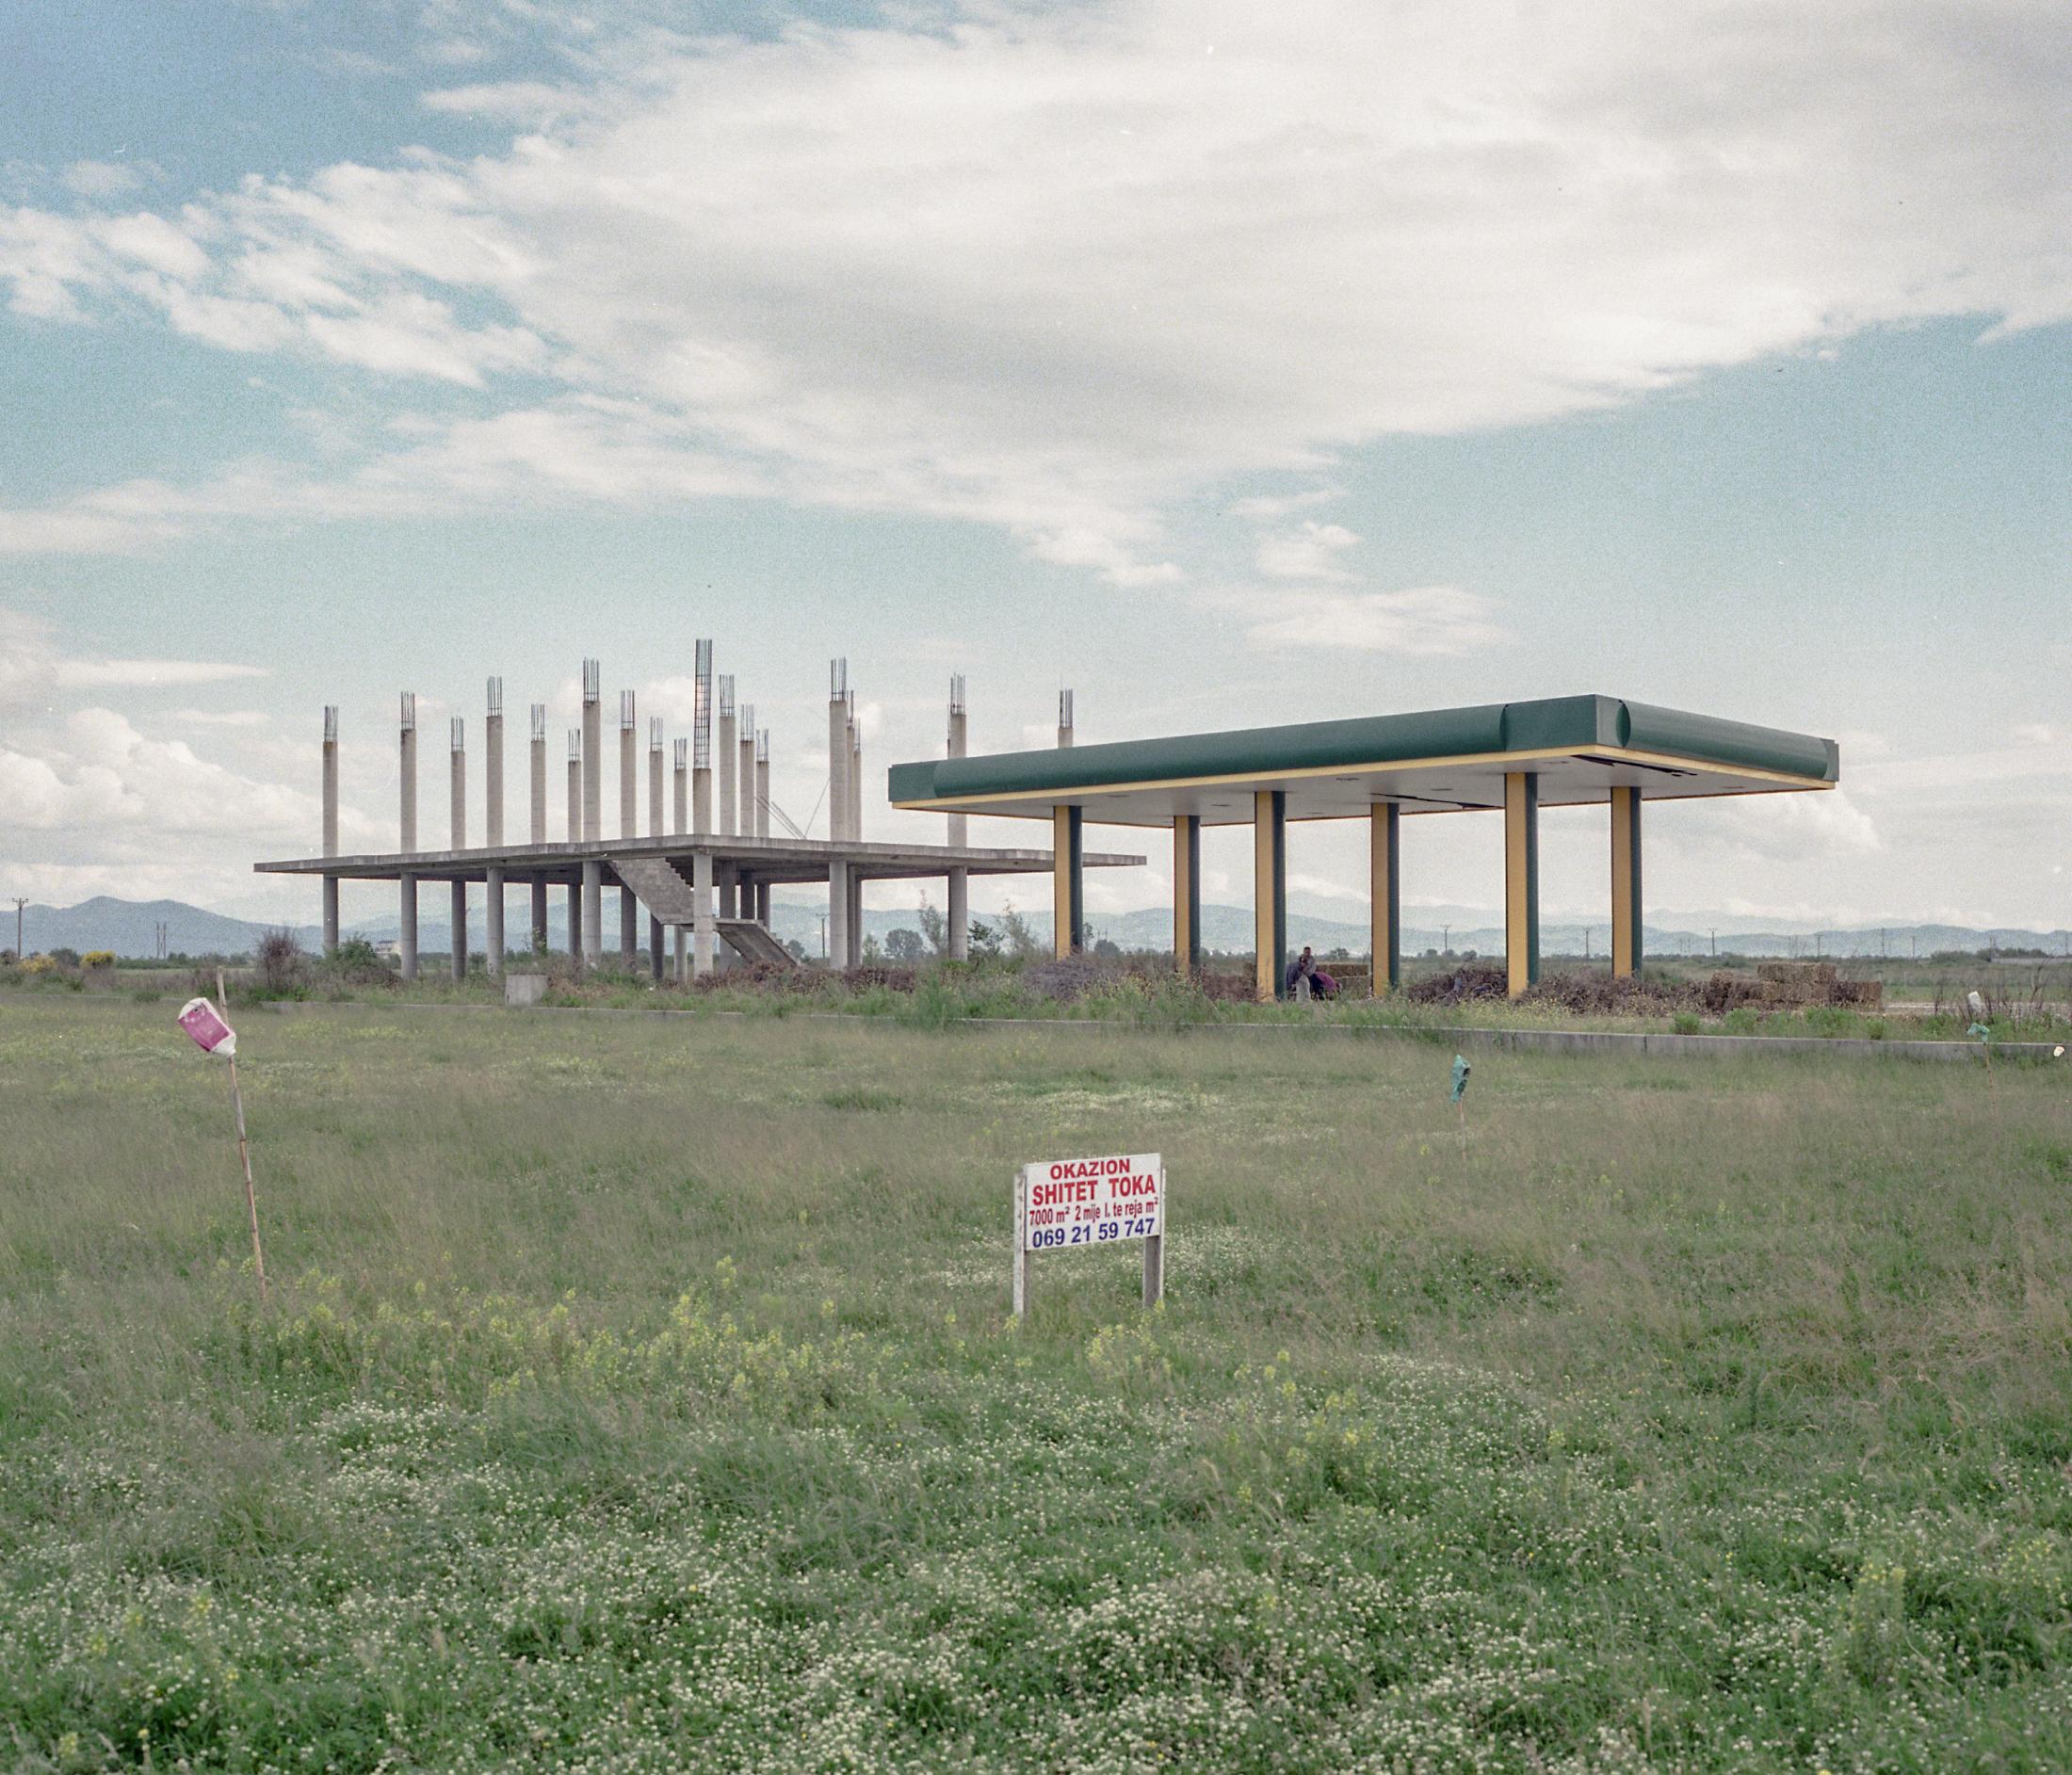 Dismantled buildings, abandoned gas stations and plots for sale are a common part of the Albanian landscape. In the photograph, a dismantled structure next to a service station that has been converted into a hay warehouse for the surrounding farmers in Lushnj&euml;. May 2019.